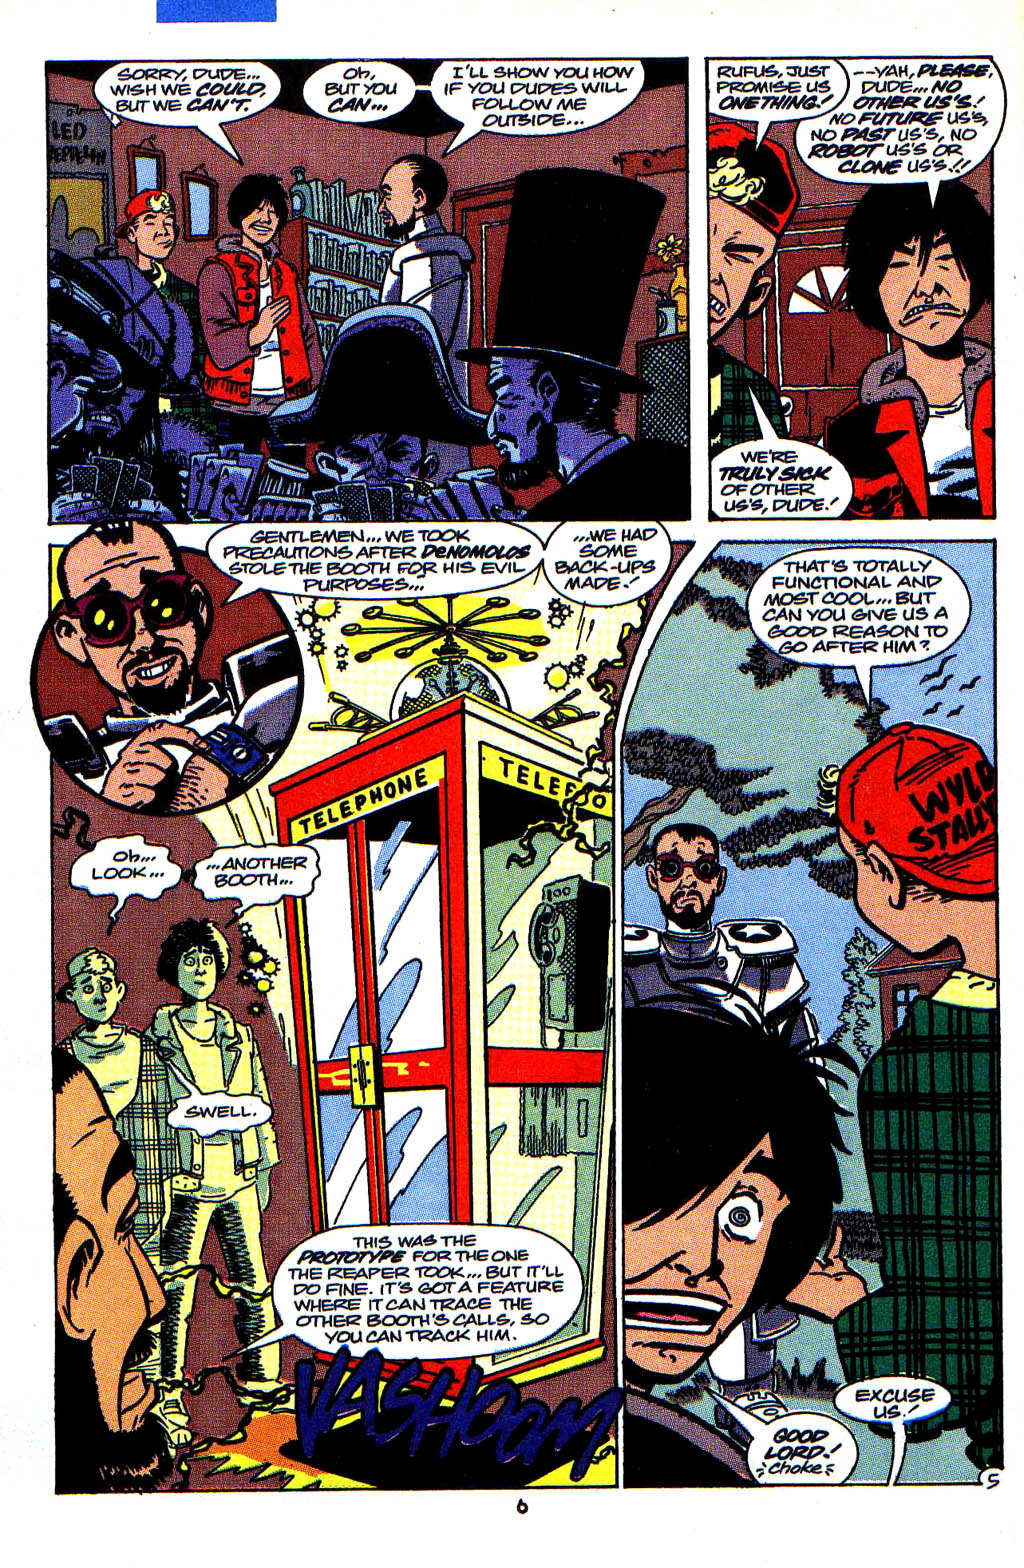 Read online Bill & Ted's Excellent Comic Book comic -  Issue #2 - 6